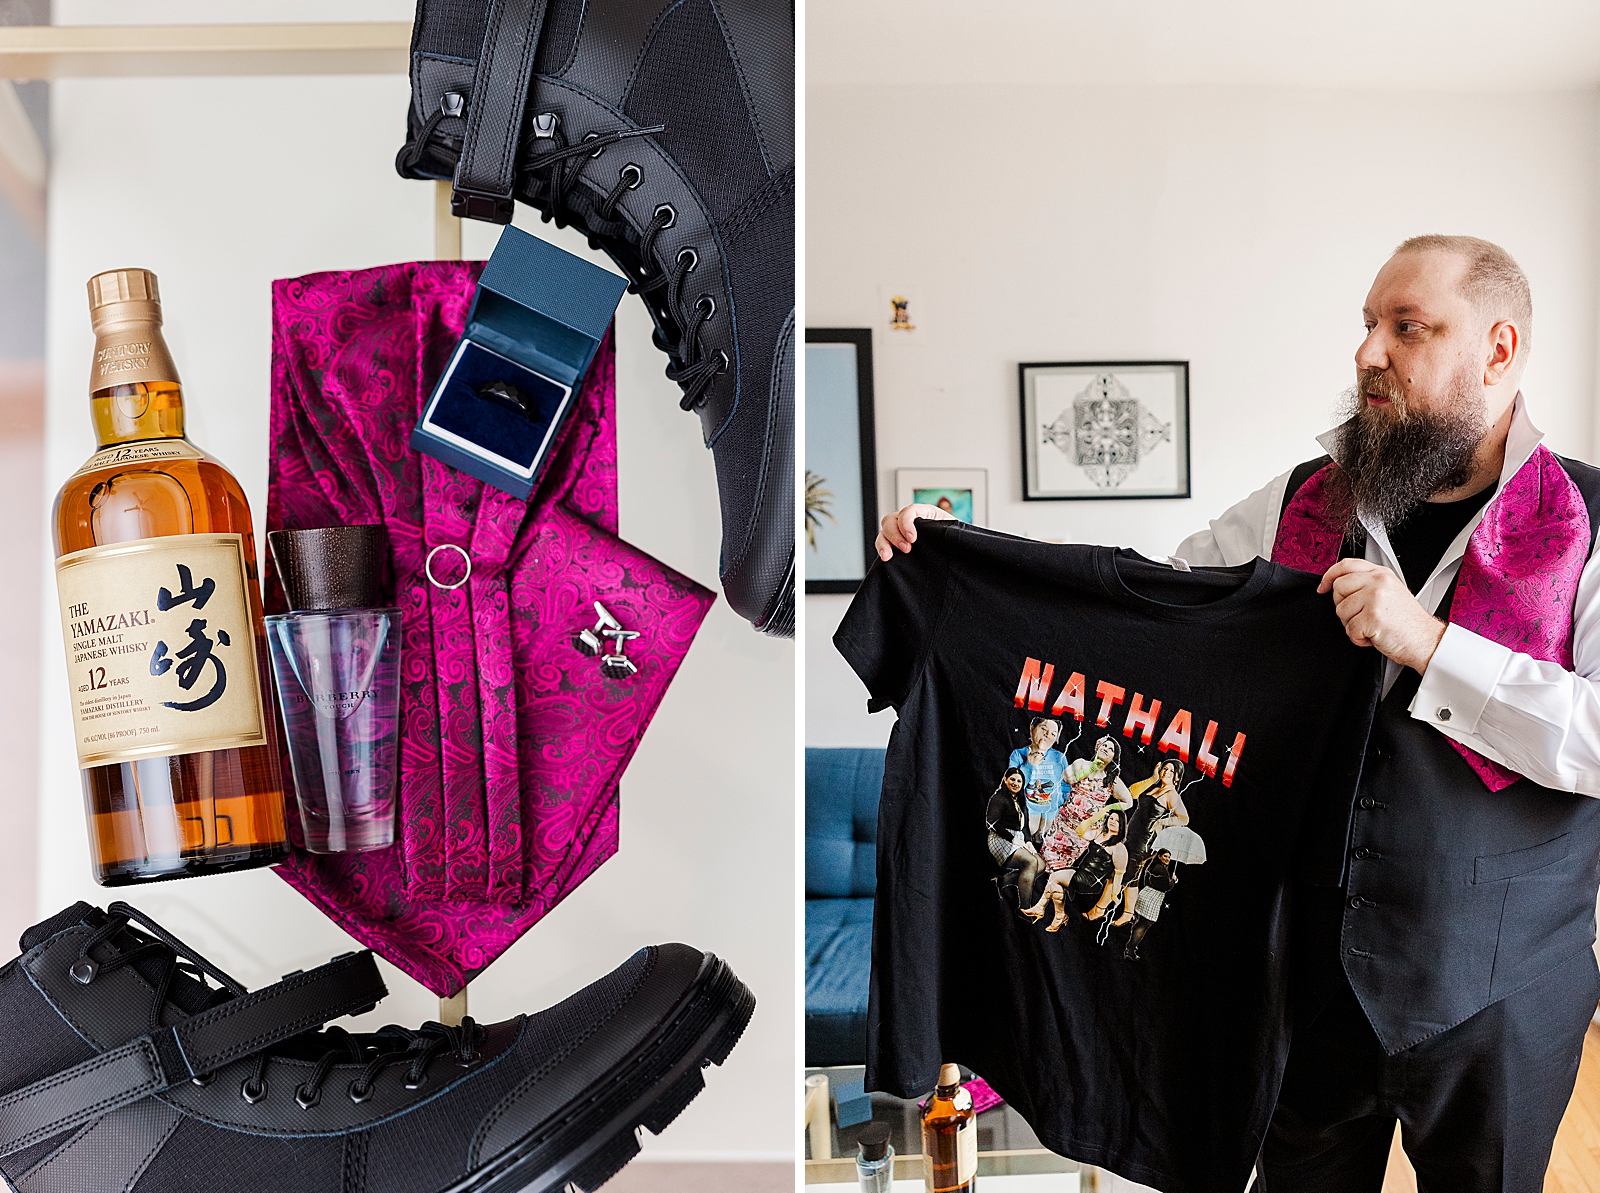 Left photo: Close up shot of the groom's details, including his shoes, ring, cufflinks, cologne, and a bottle of whisky. 
Right photo: Shot of the groom holding up a black t-shirt featuring multiple photos of the bride. 